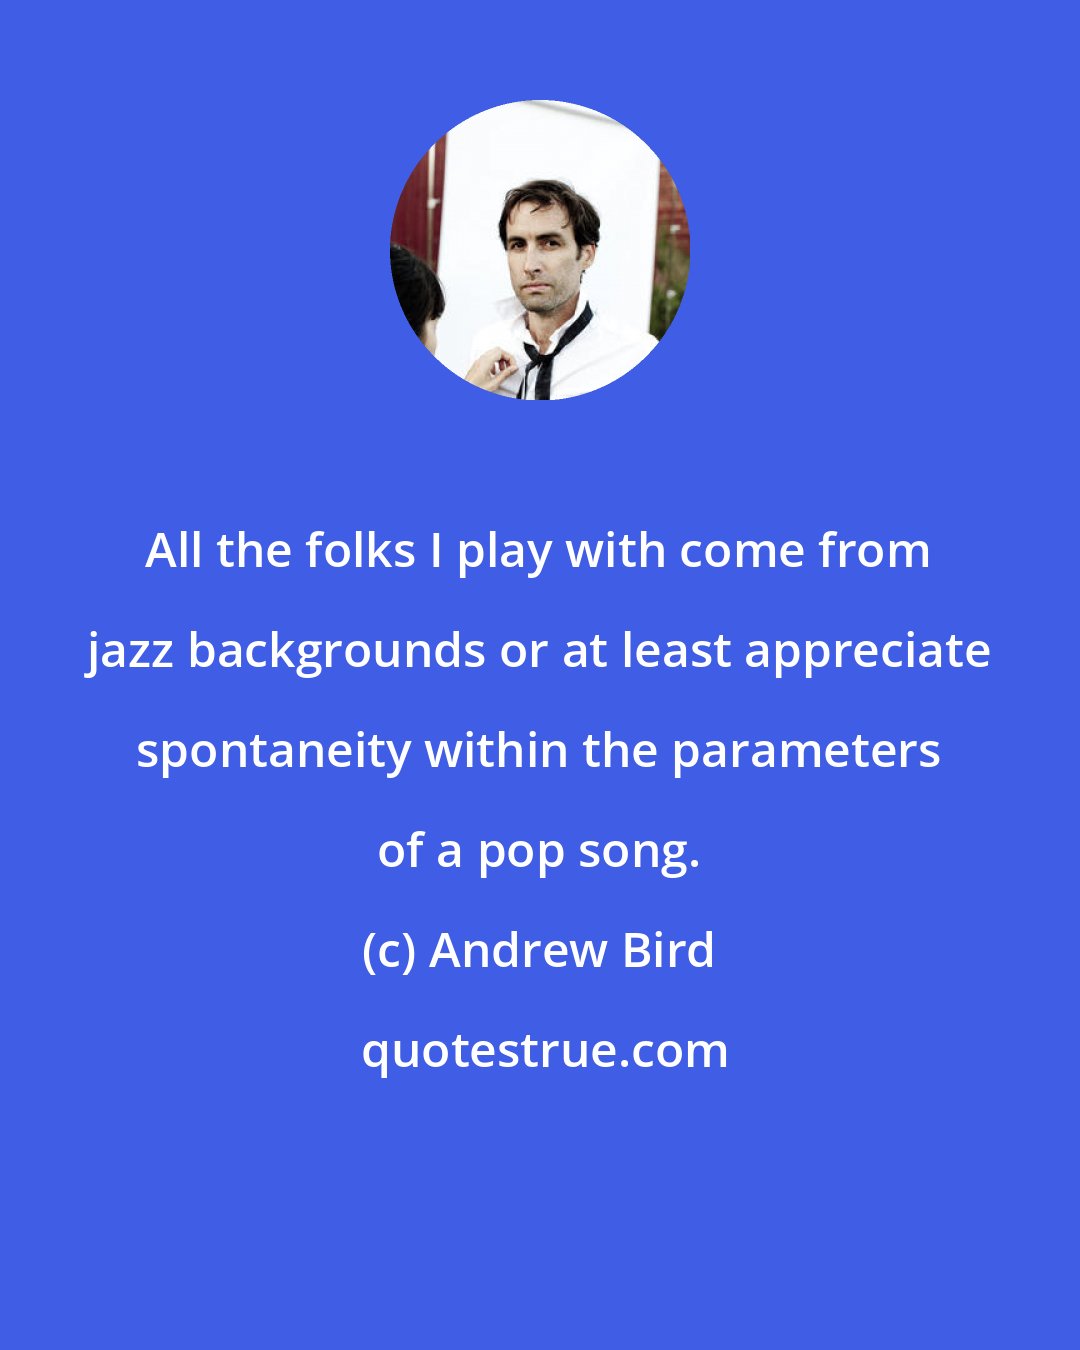 Andrew Bird: All the folks I play with come from jazz backgrounds or at least appreciate spontaneity within the parameters of a pop song.